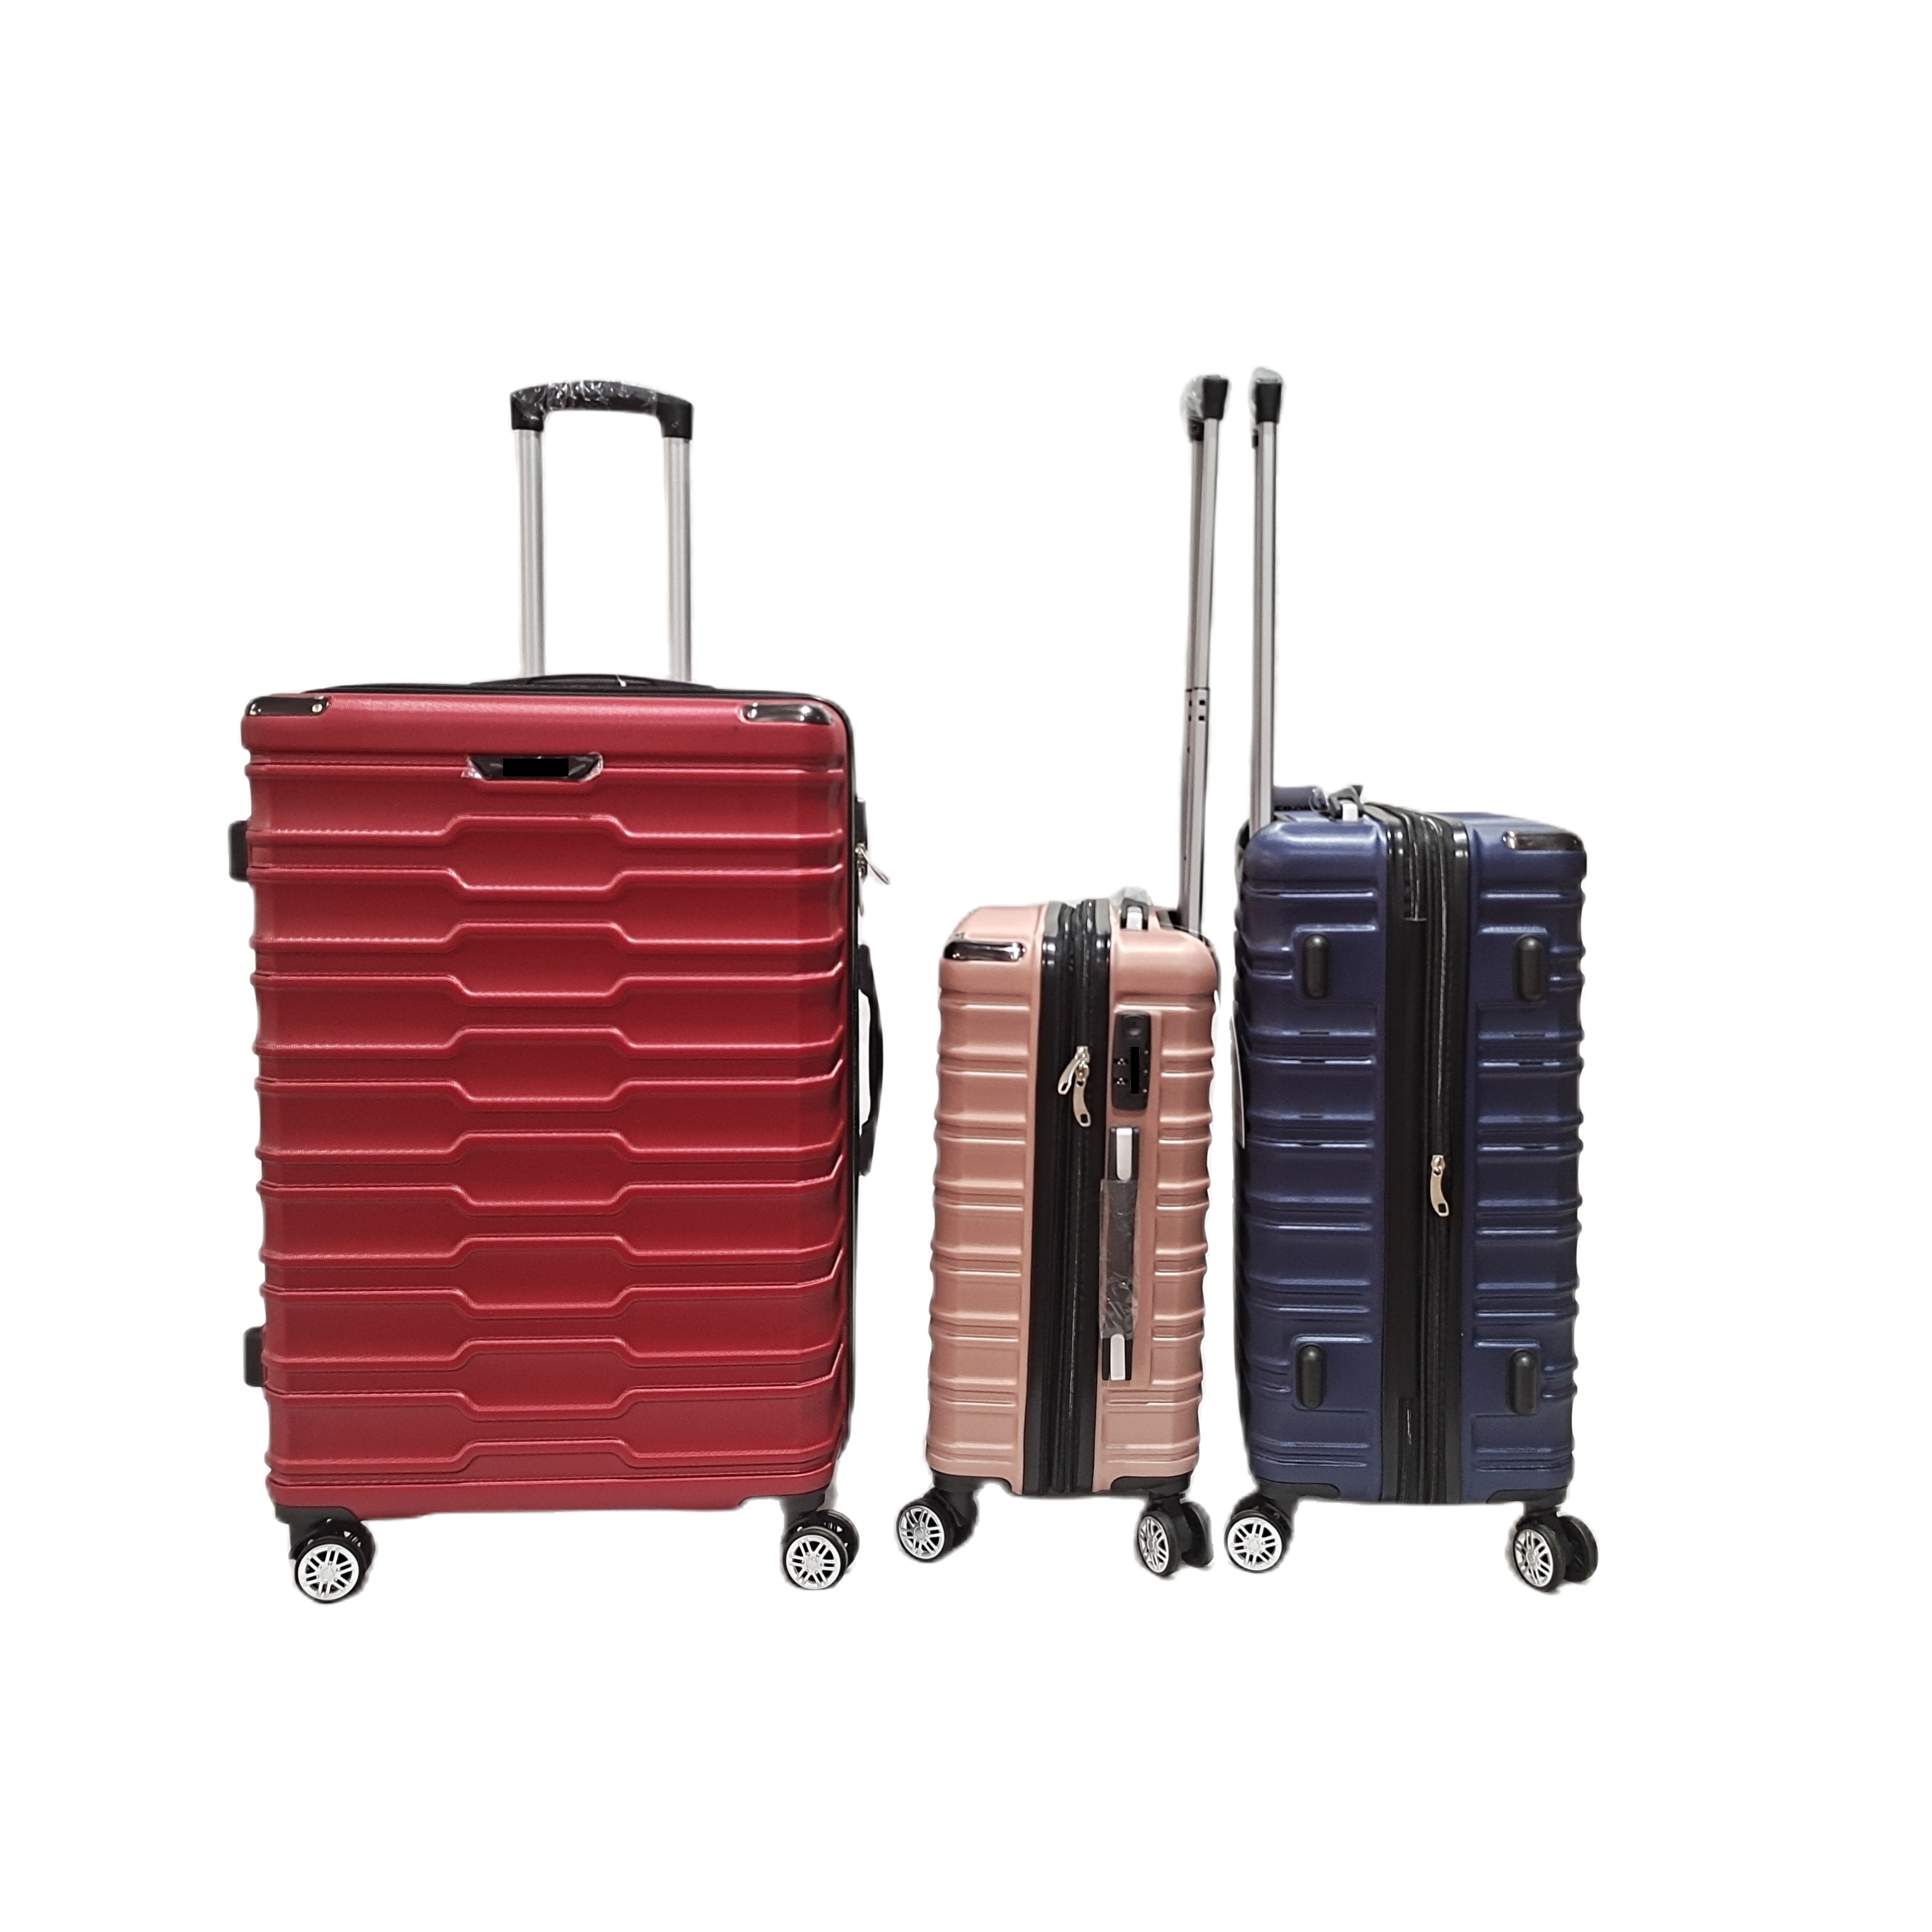 Fashion ABS Travel Luggage Set BusinessTrolley Suitcase